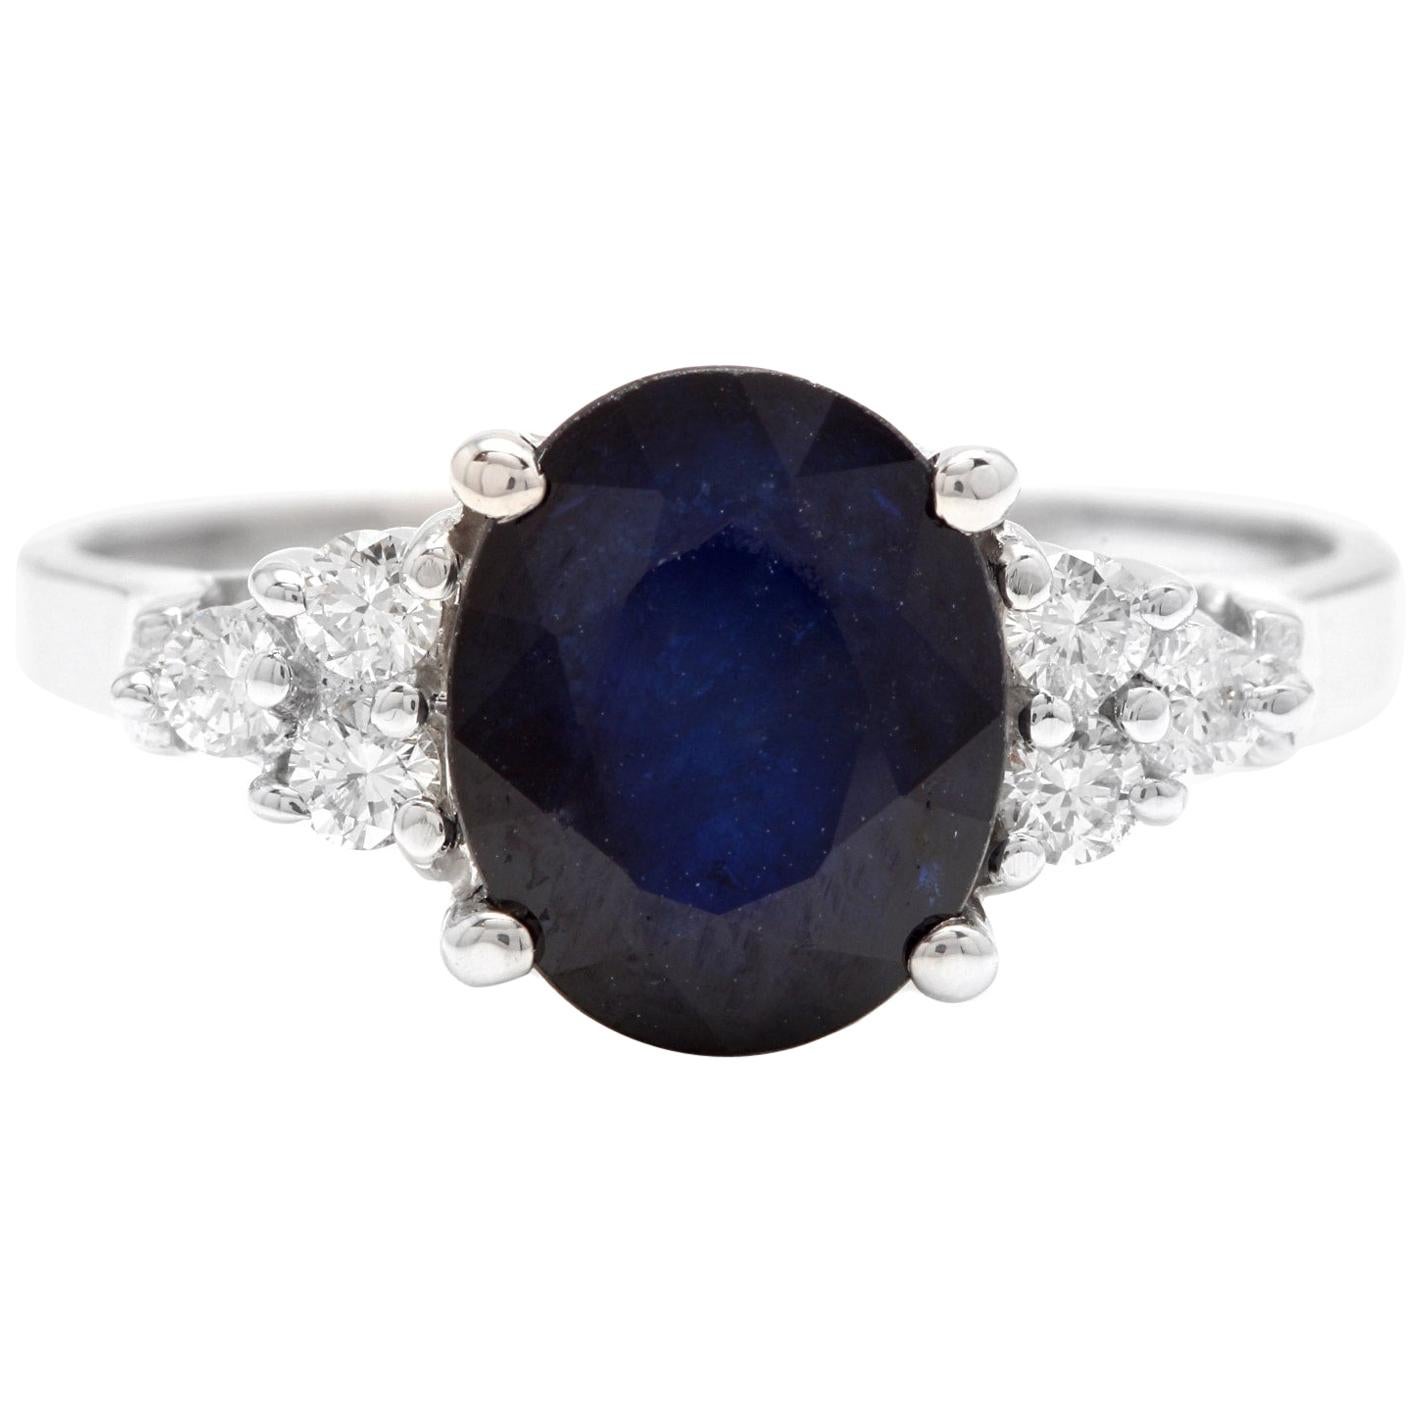 5.75 Carat Natural Blue Sapphire and Diamond 14 Karat Solid White Gold Ring